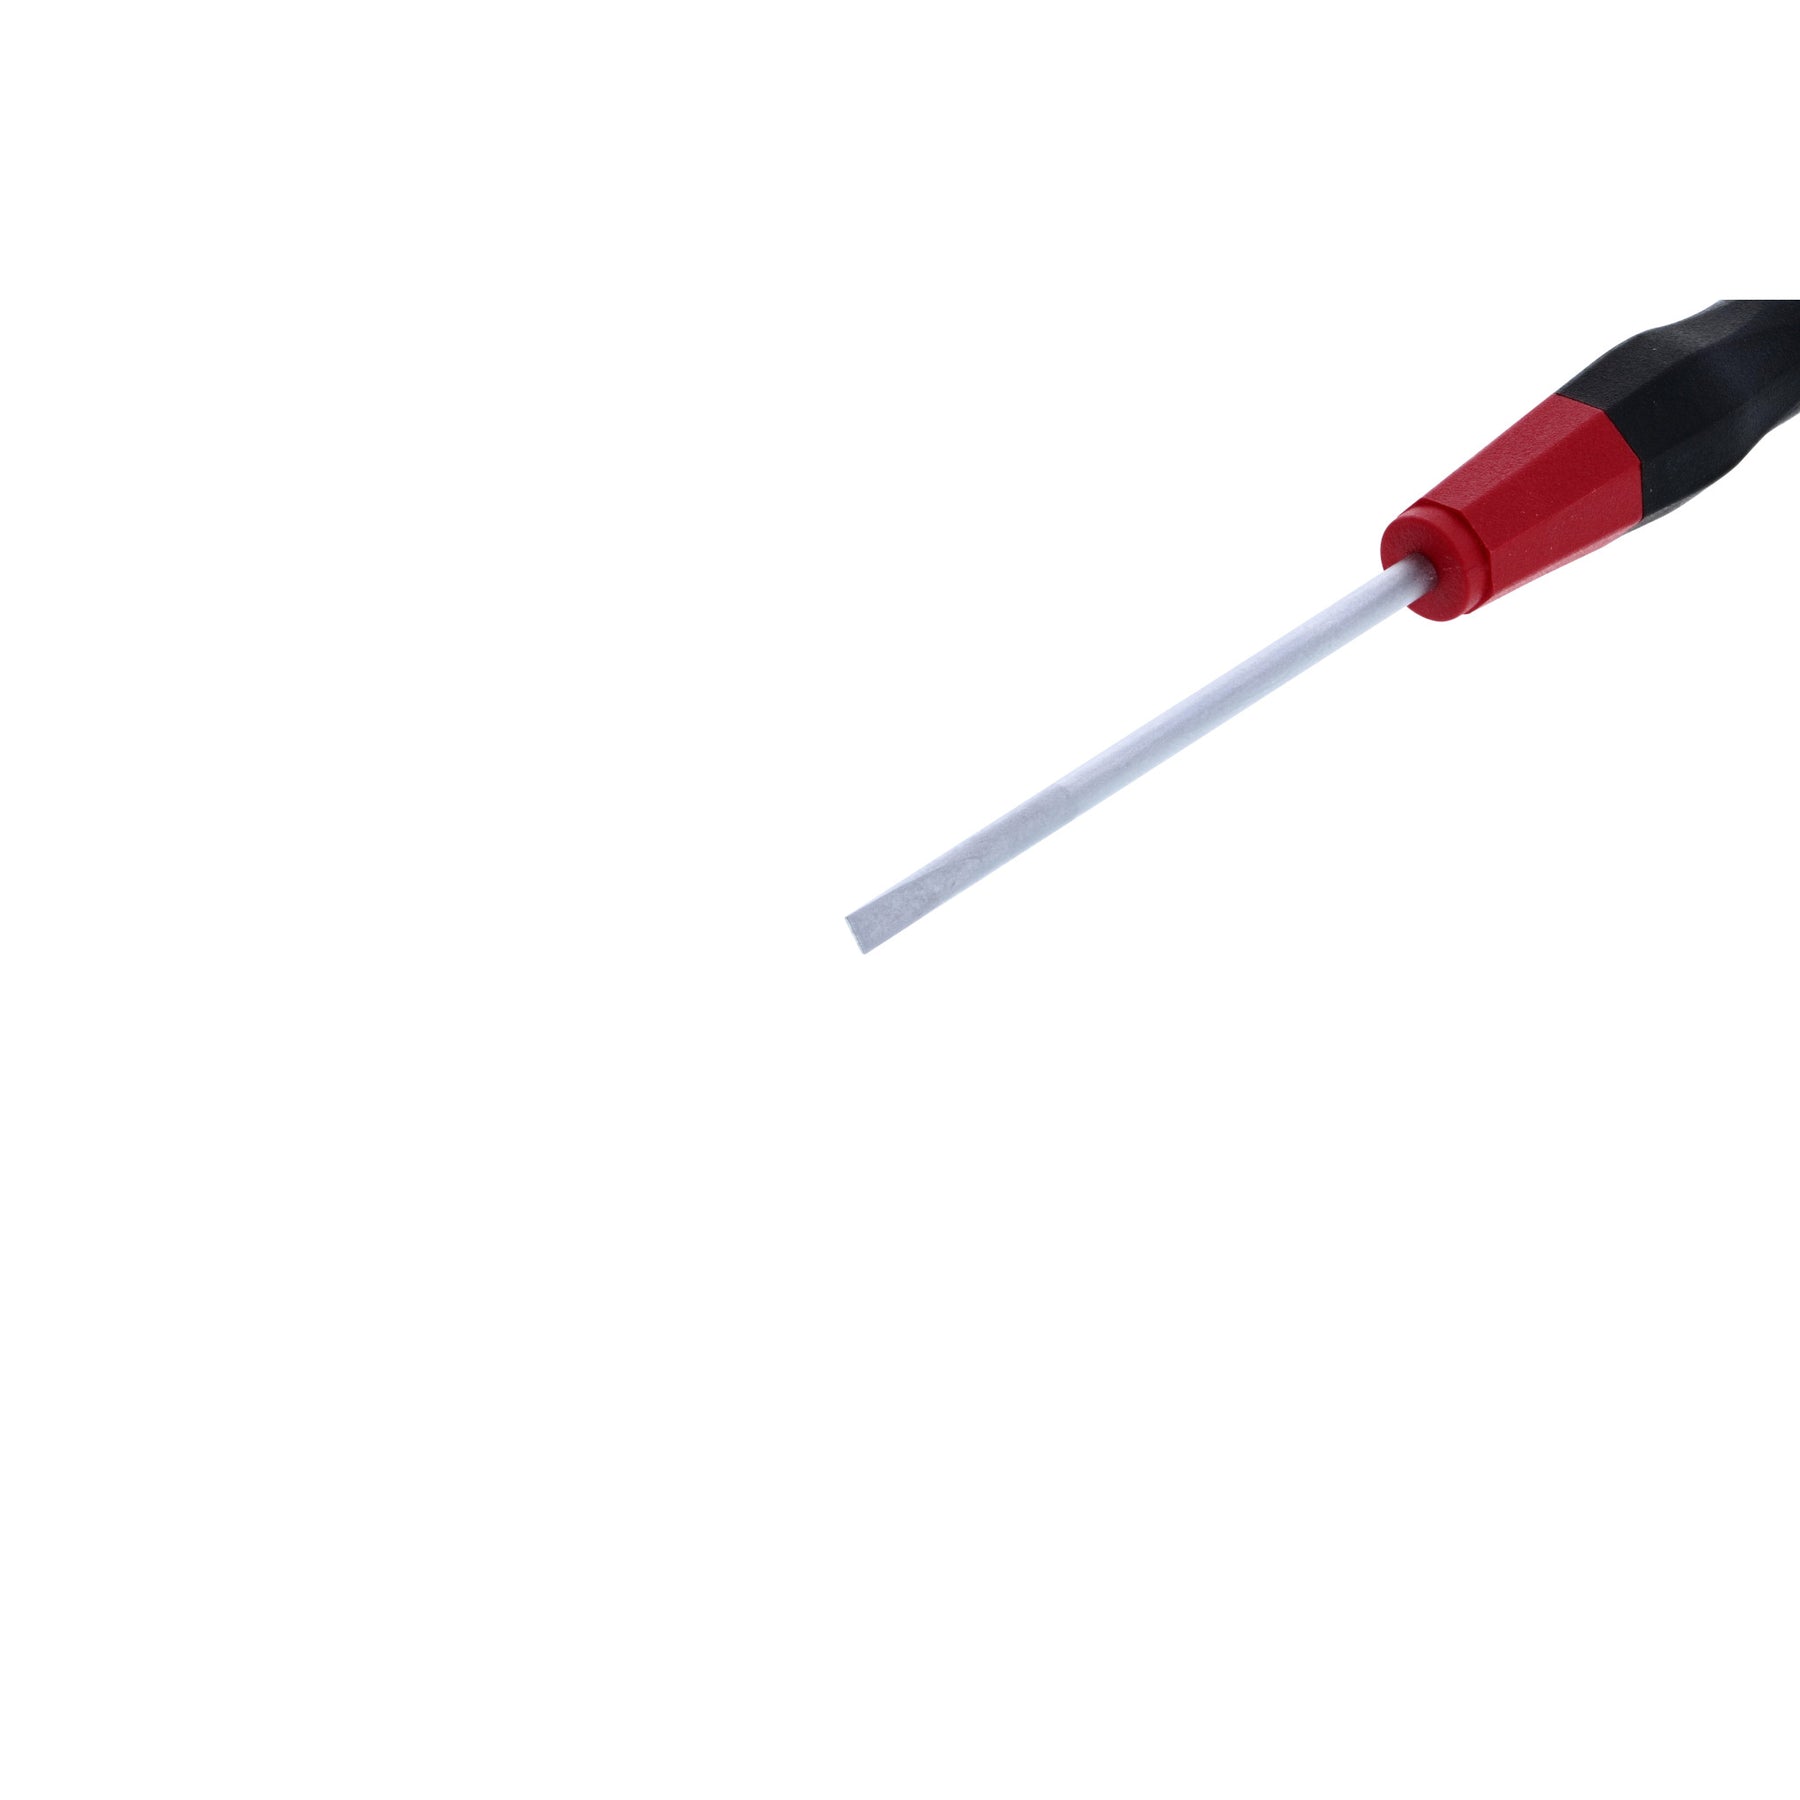 PicoFinish Slotted Screwdriver 4.0mm x 60mm